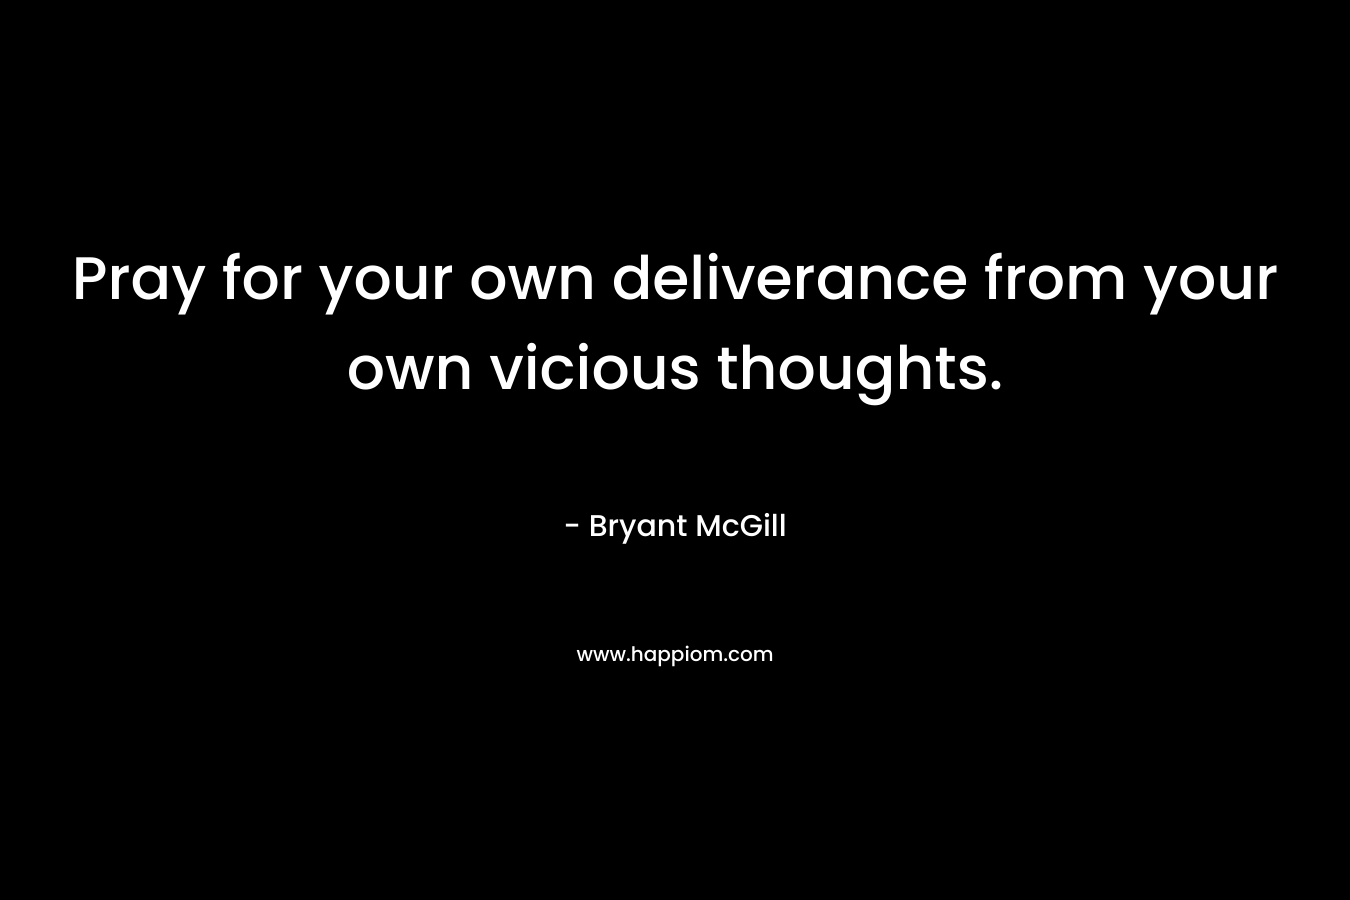 Pray for your own deliverance from your own vicious thoughts.